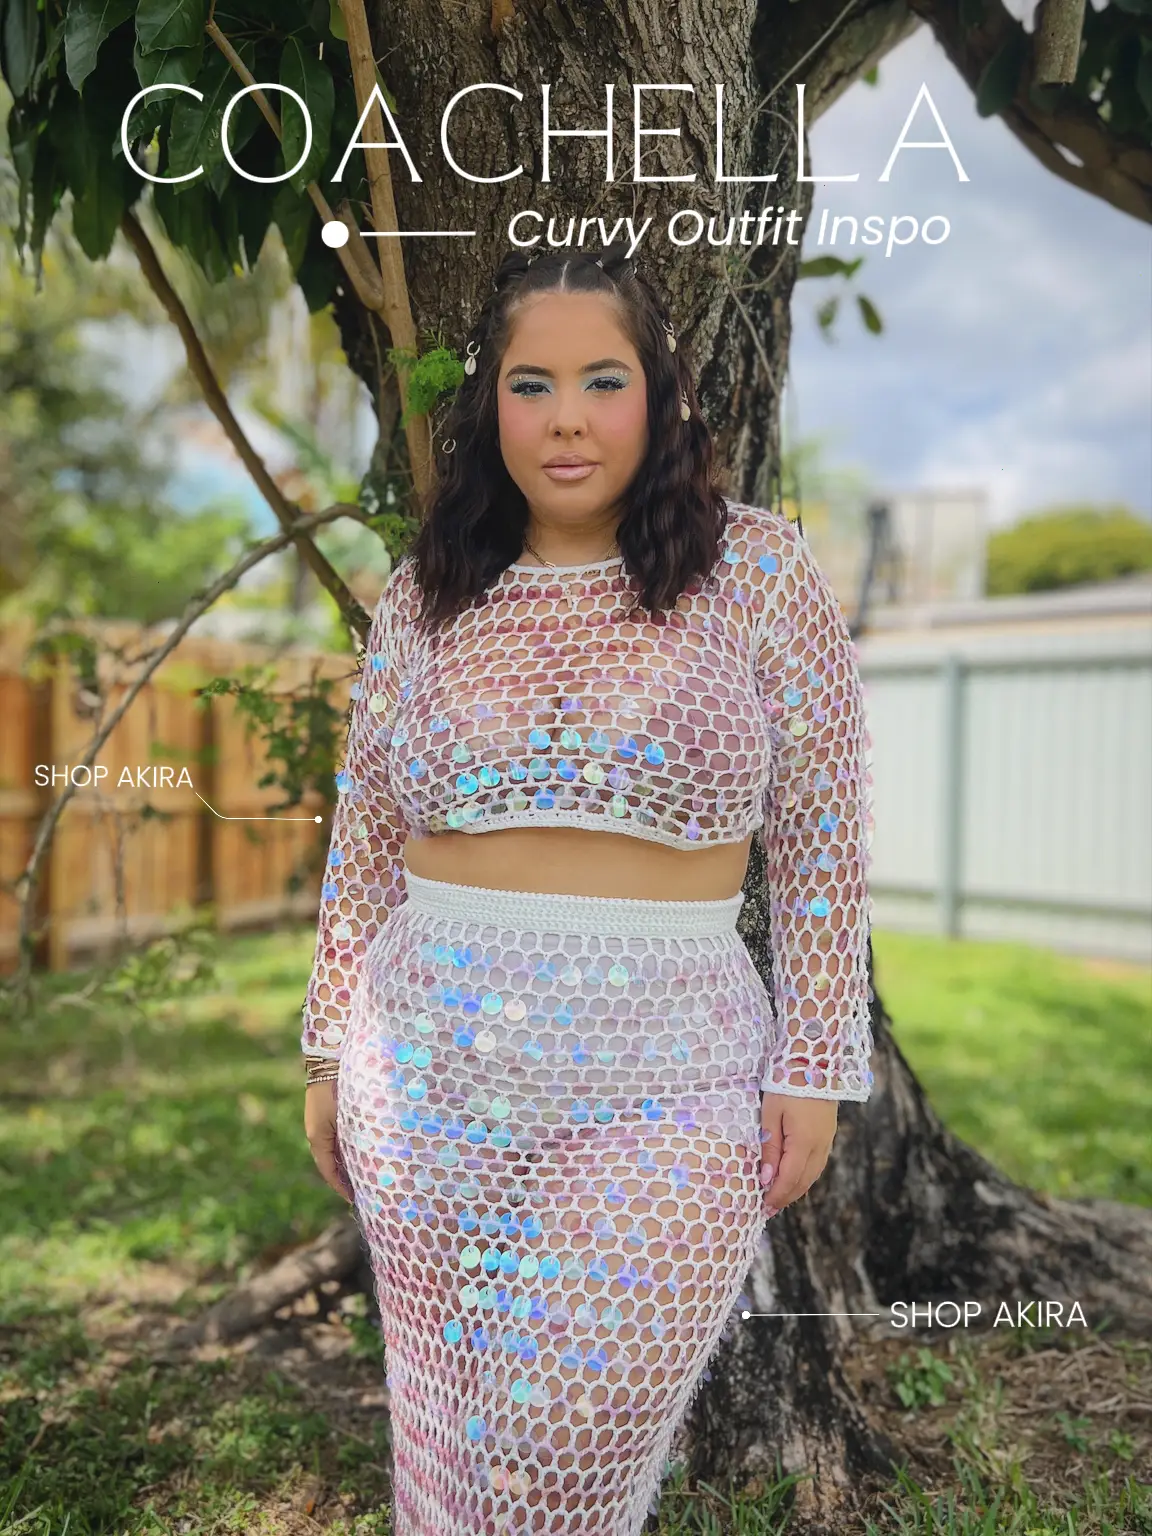 CURVY COACHELLA OUTFIT INSPO 🎡, Gallery posted by Nelly Toledo